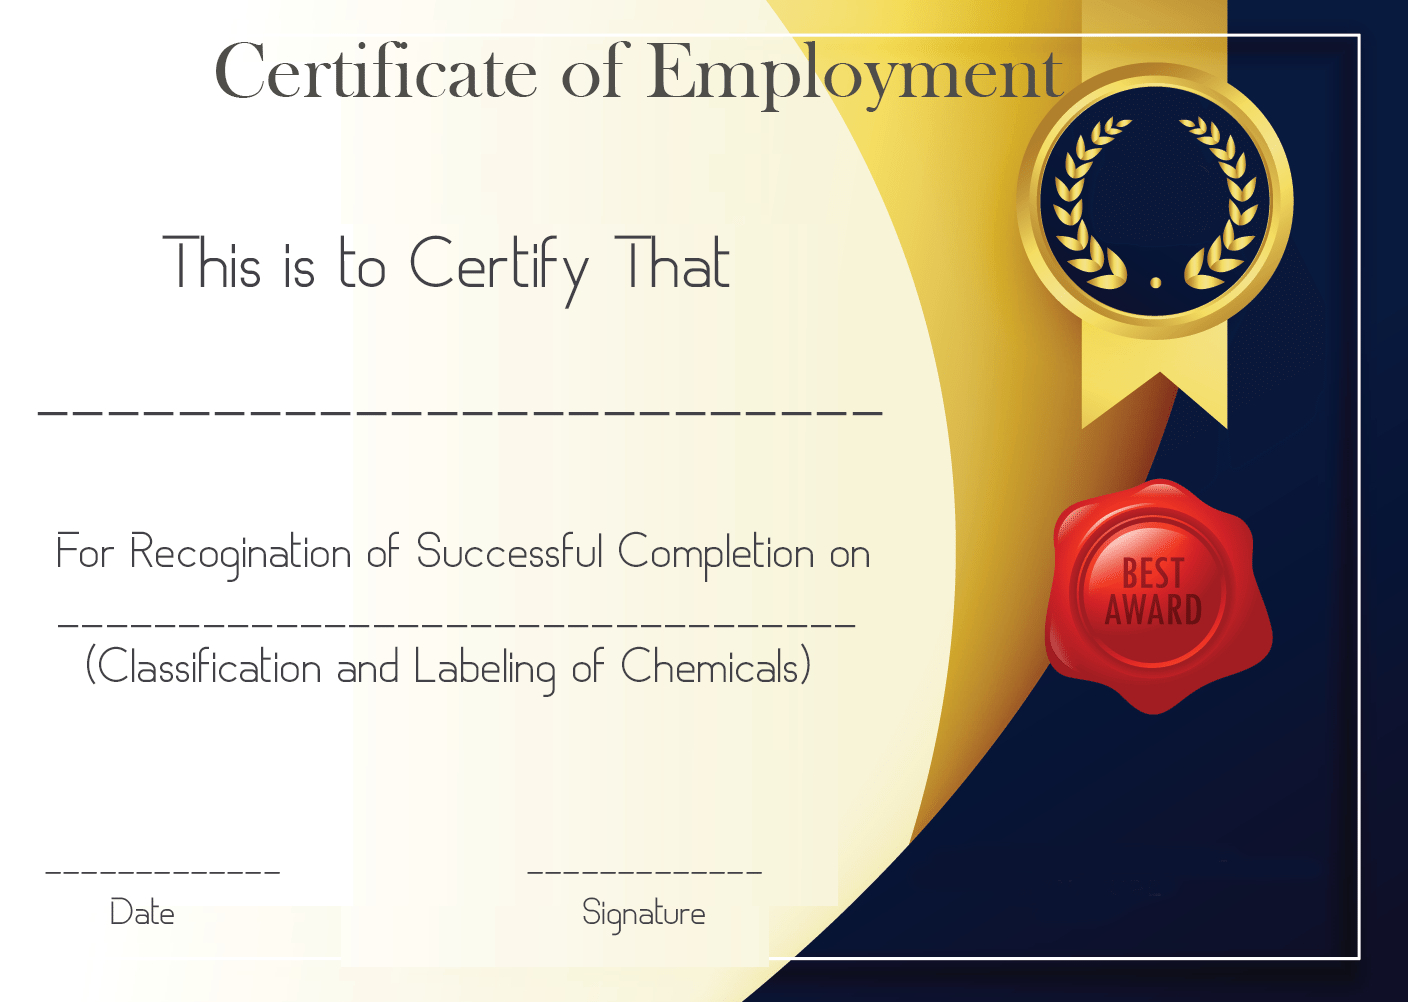 Free Sample Certificate Of Employment Template | Certificate In Sample Certificate Employment Template